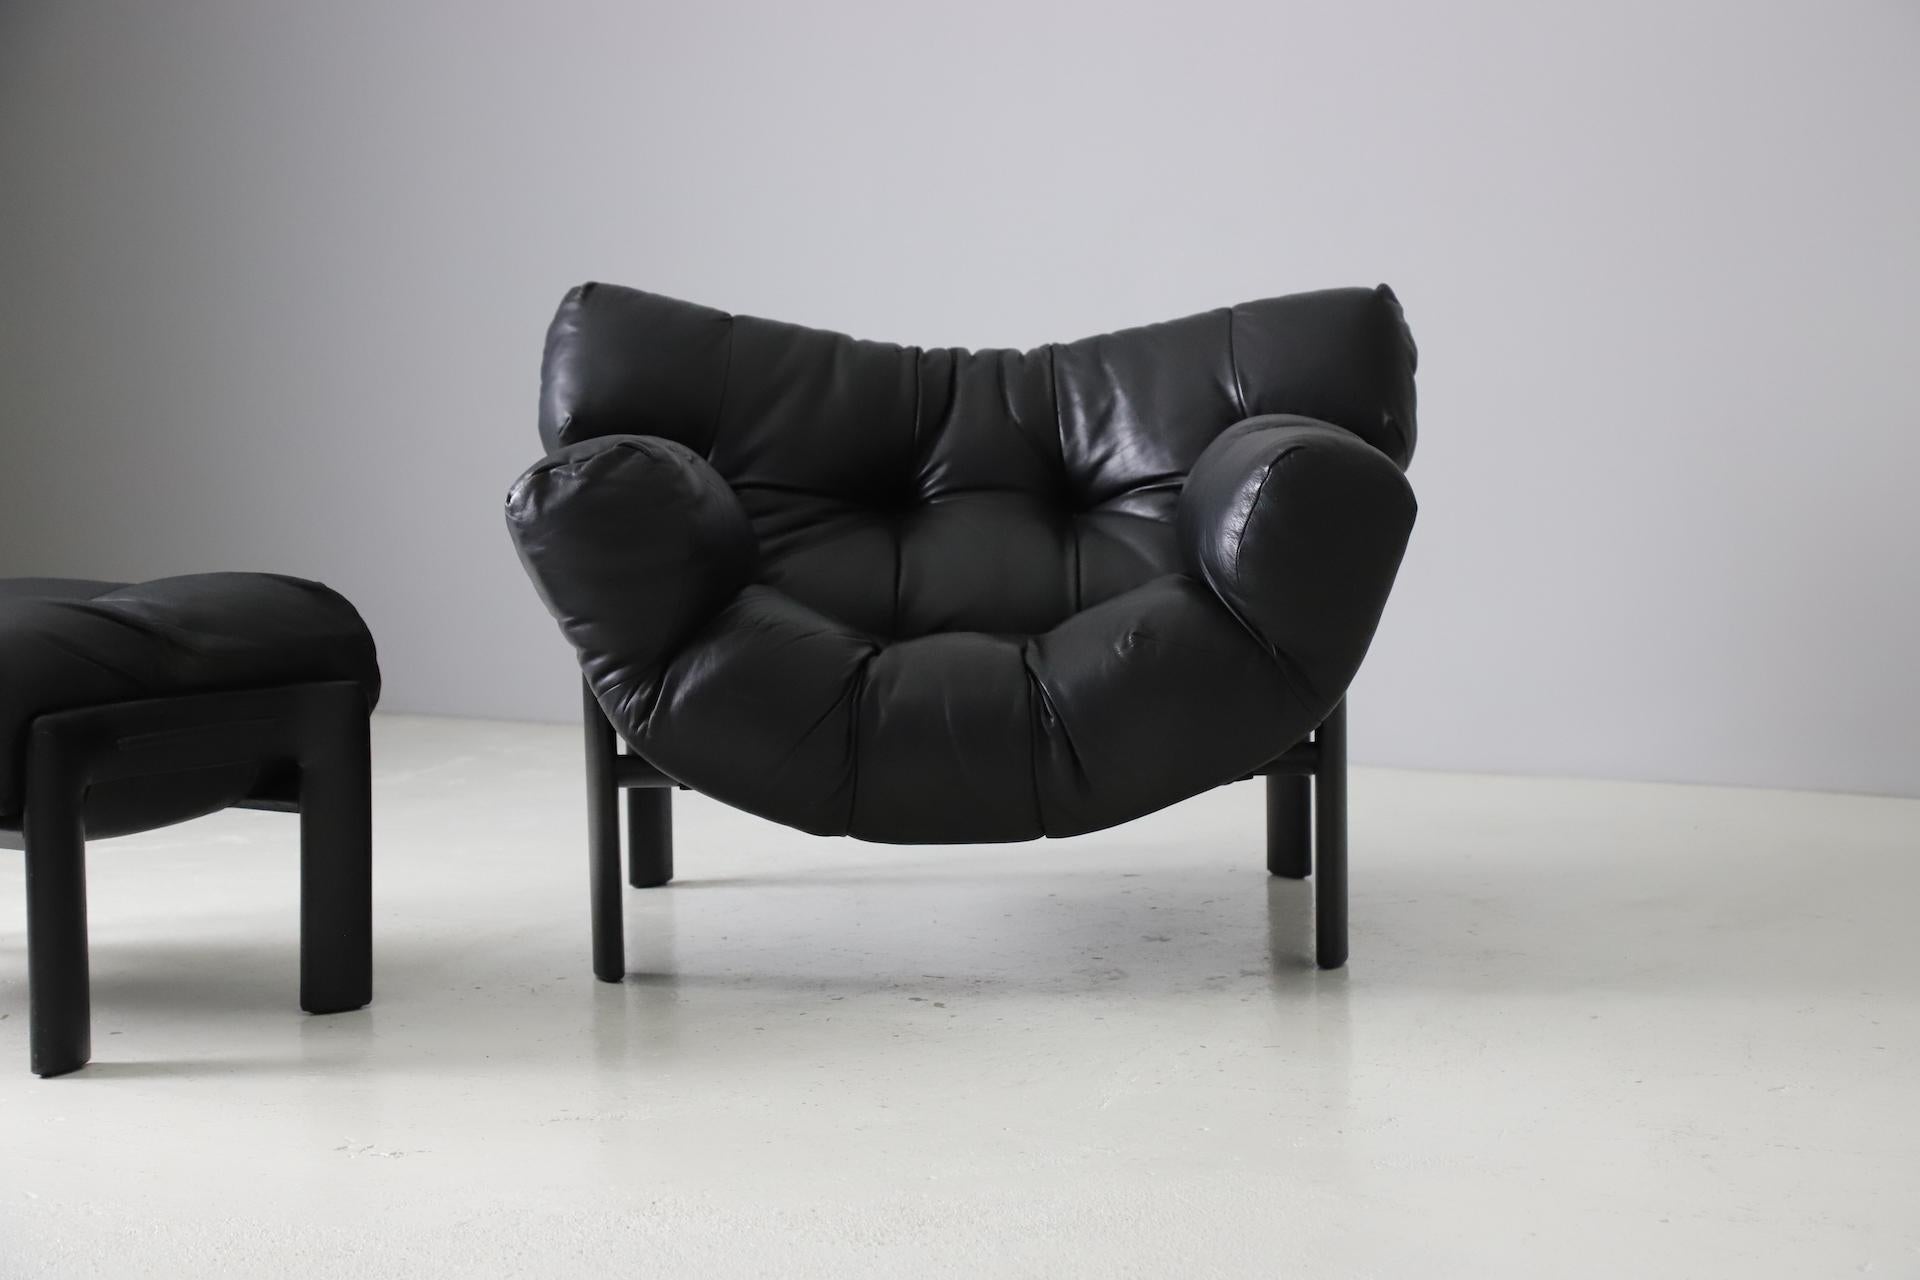 Stained Angelo Mangiarotti & Chiara Pampo 'Légère' lounge chair with ottoman, 1978